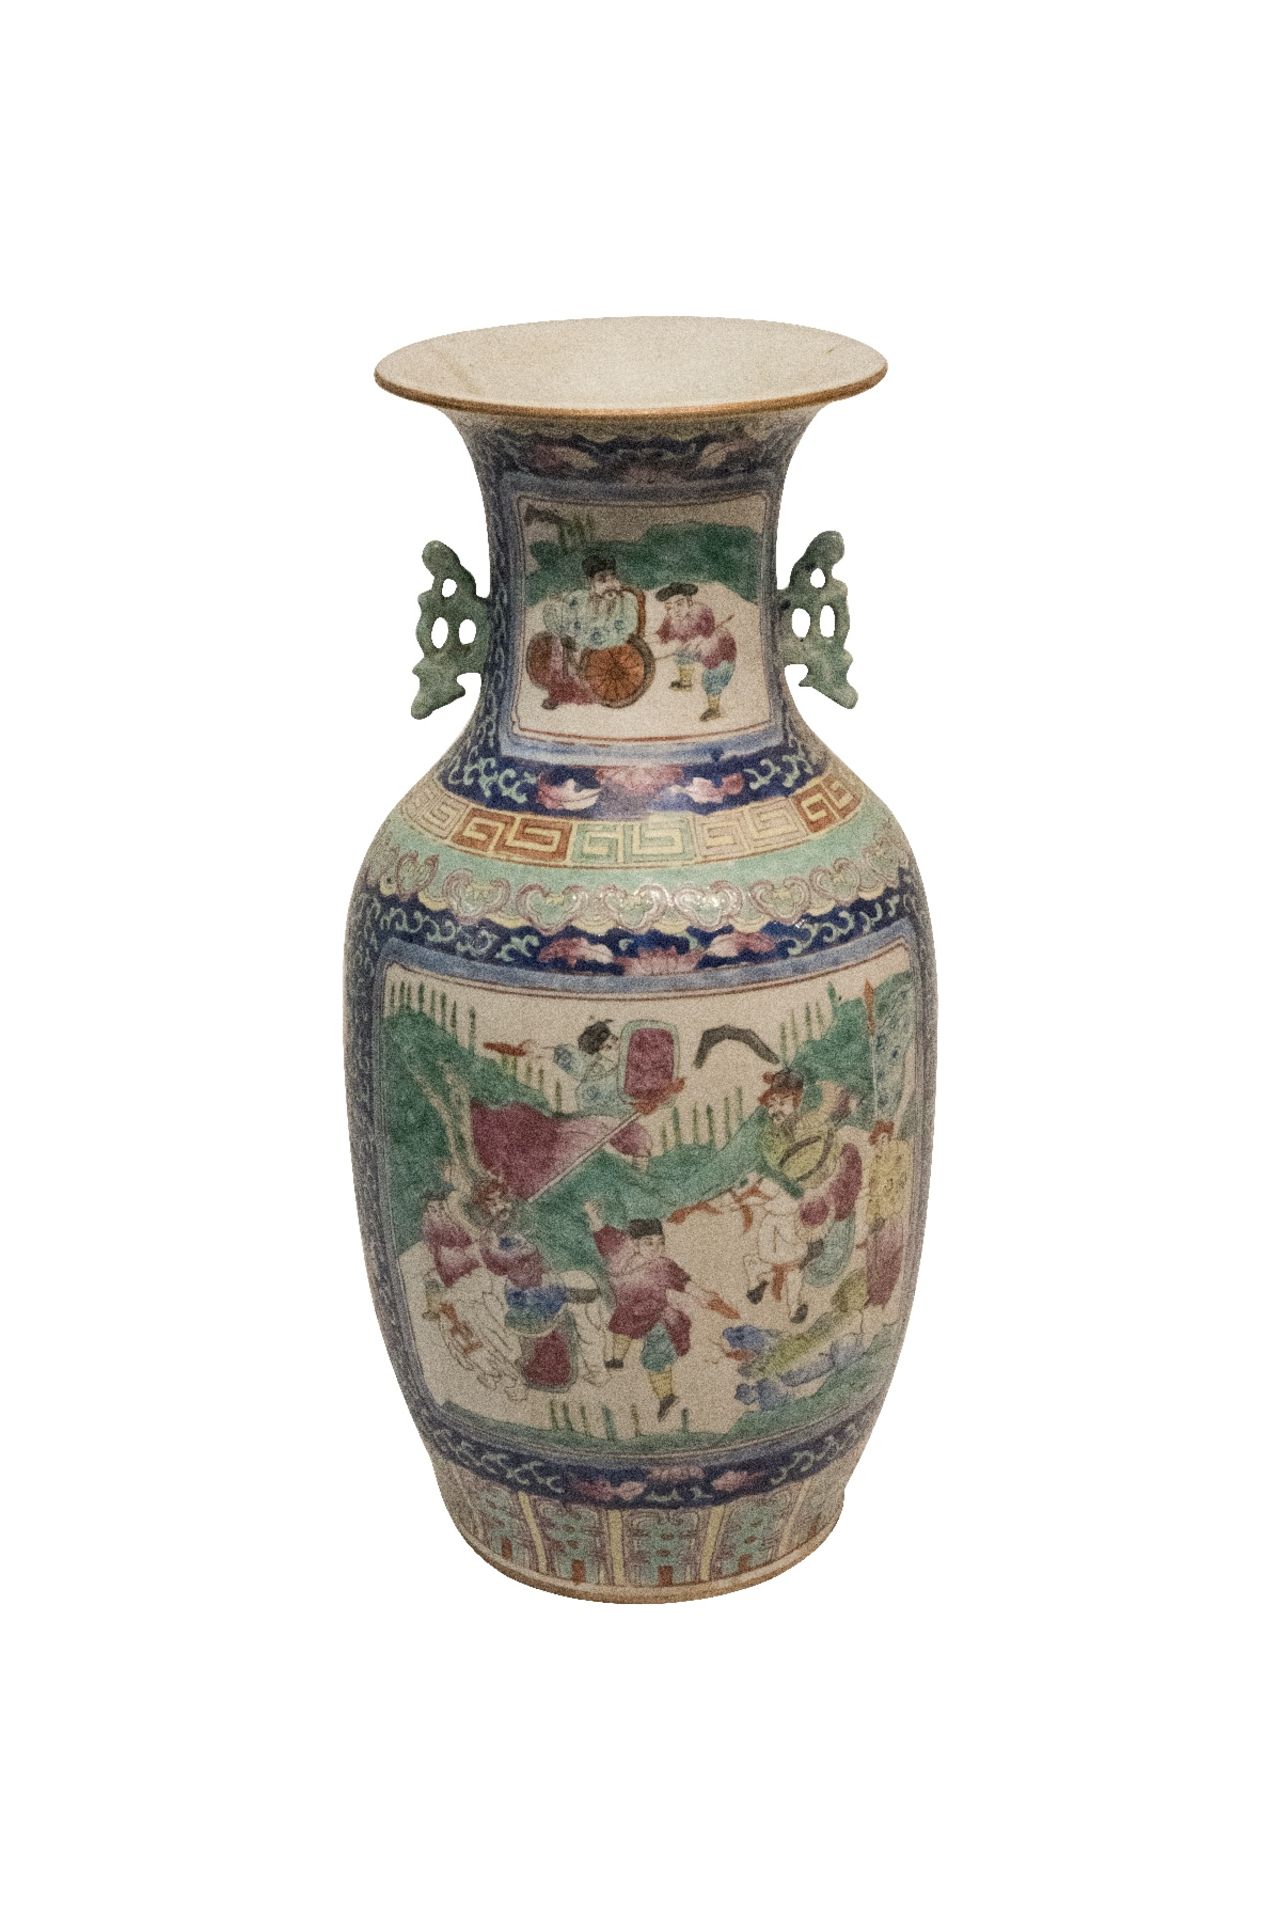 Chinesische Vase Famille Rose | Chinese Vase Famille Rose - Image 2 of 5